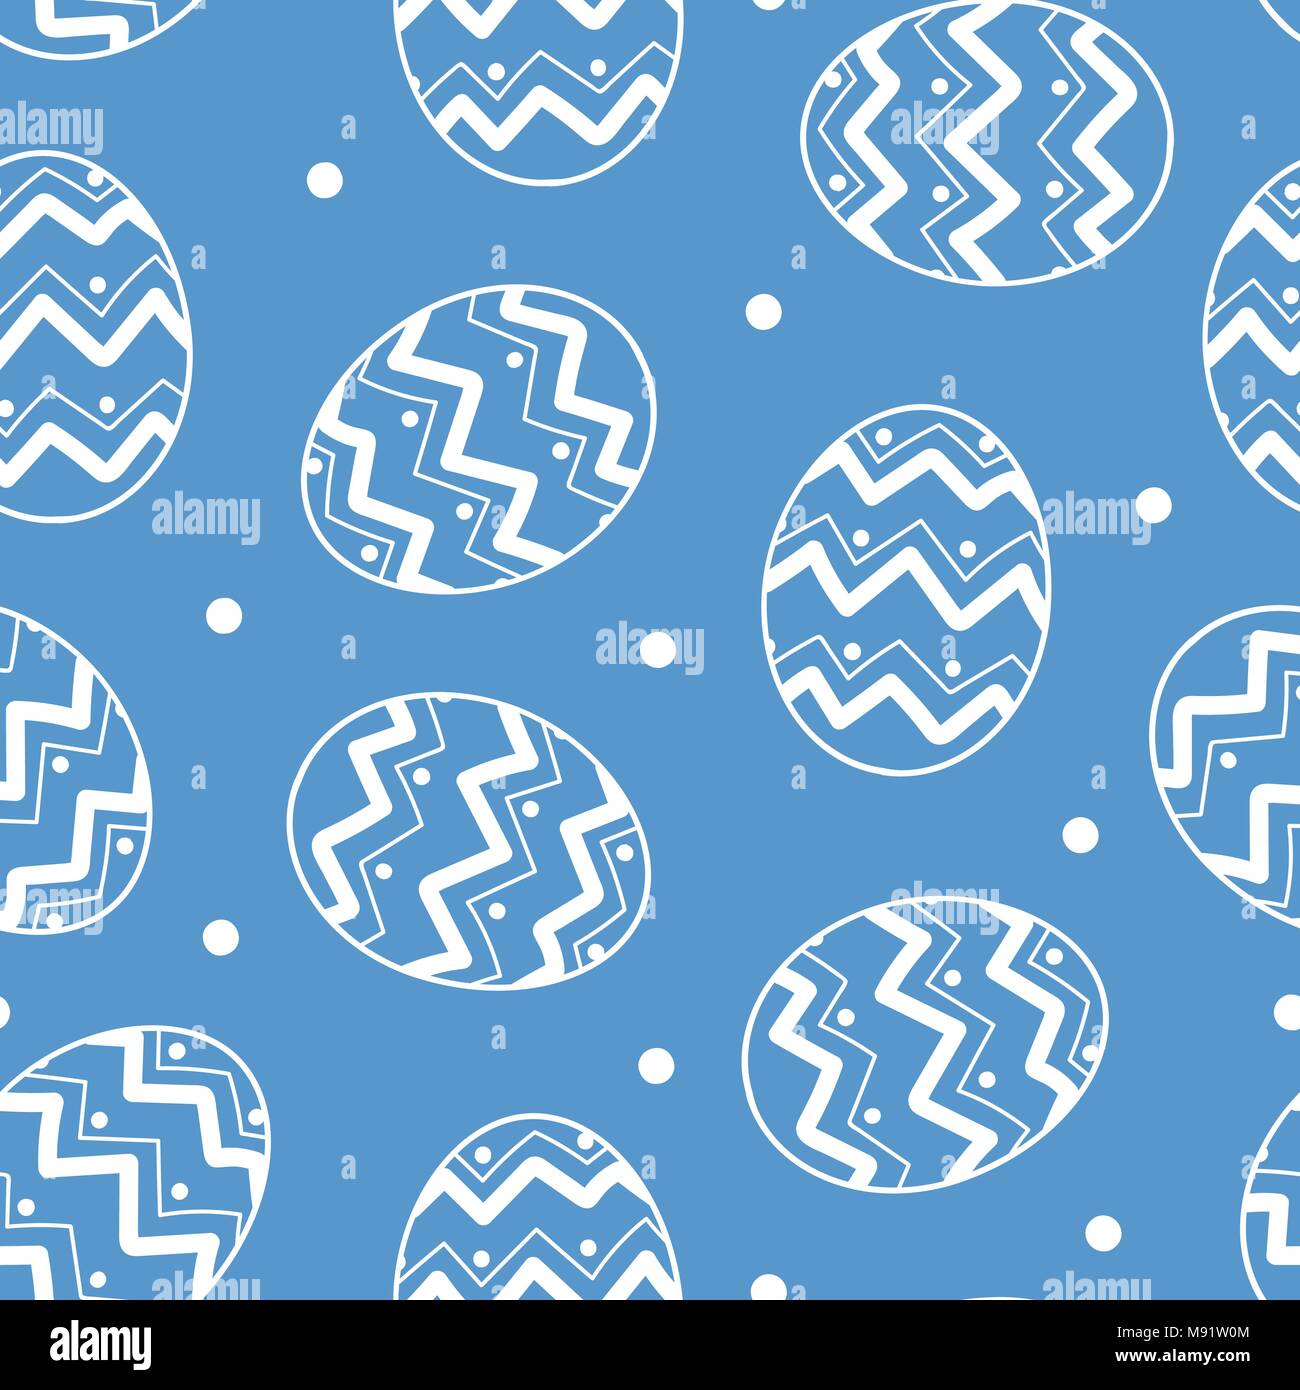 Easter eggs in white outline with white dots random on blue background. Cute hand drawn seamless pattern design for Easter festival in vector illustra Stock Vector